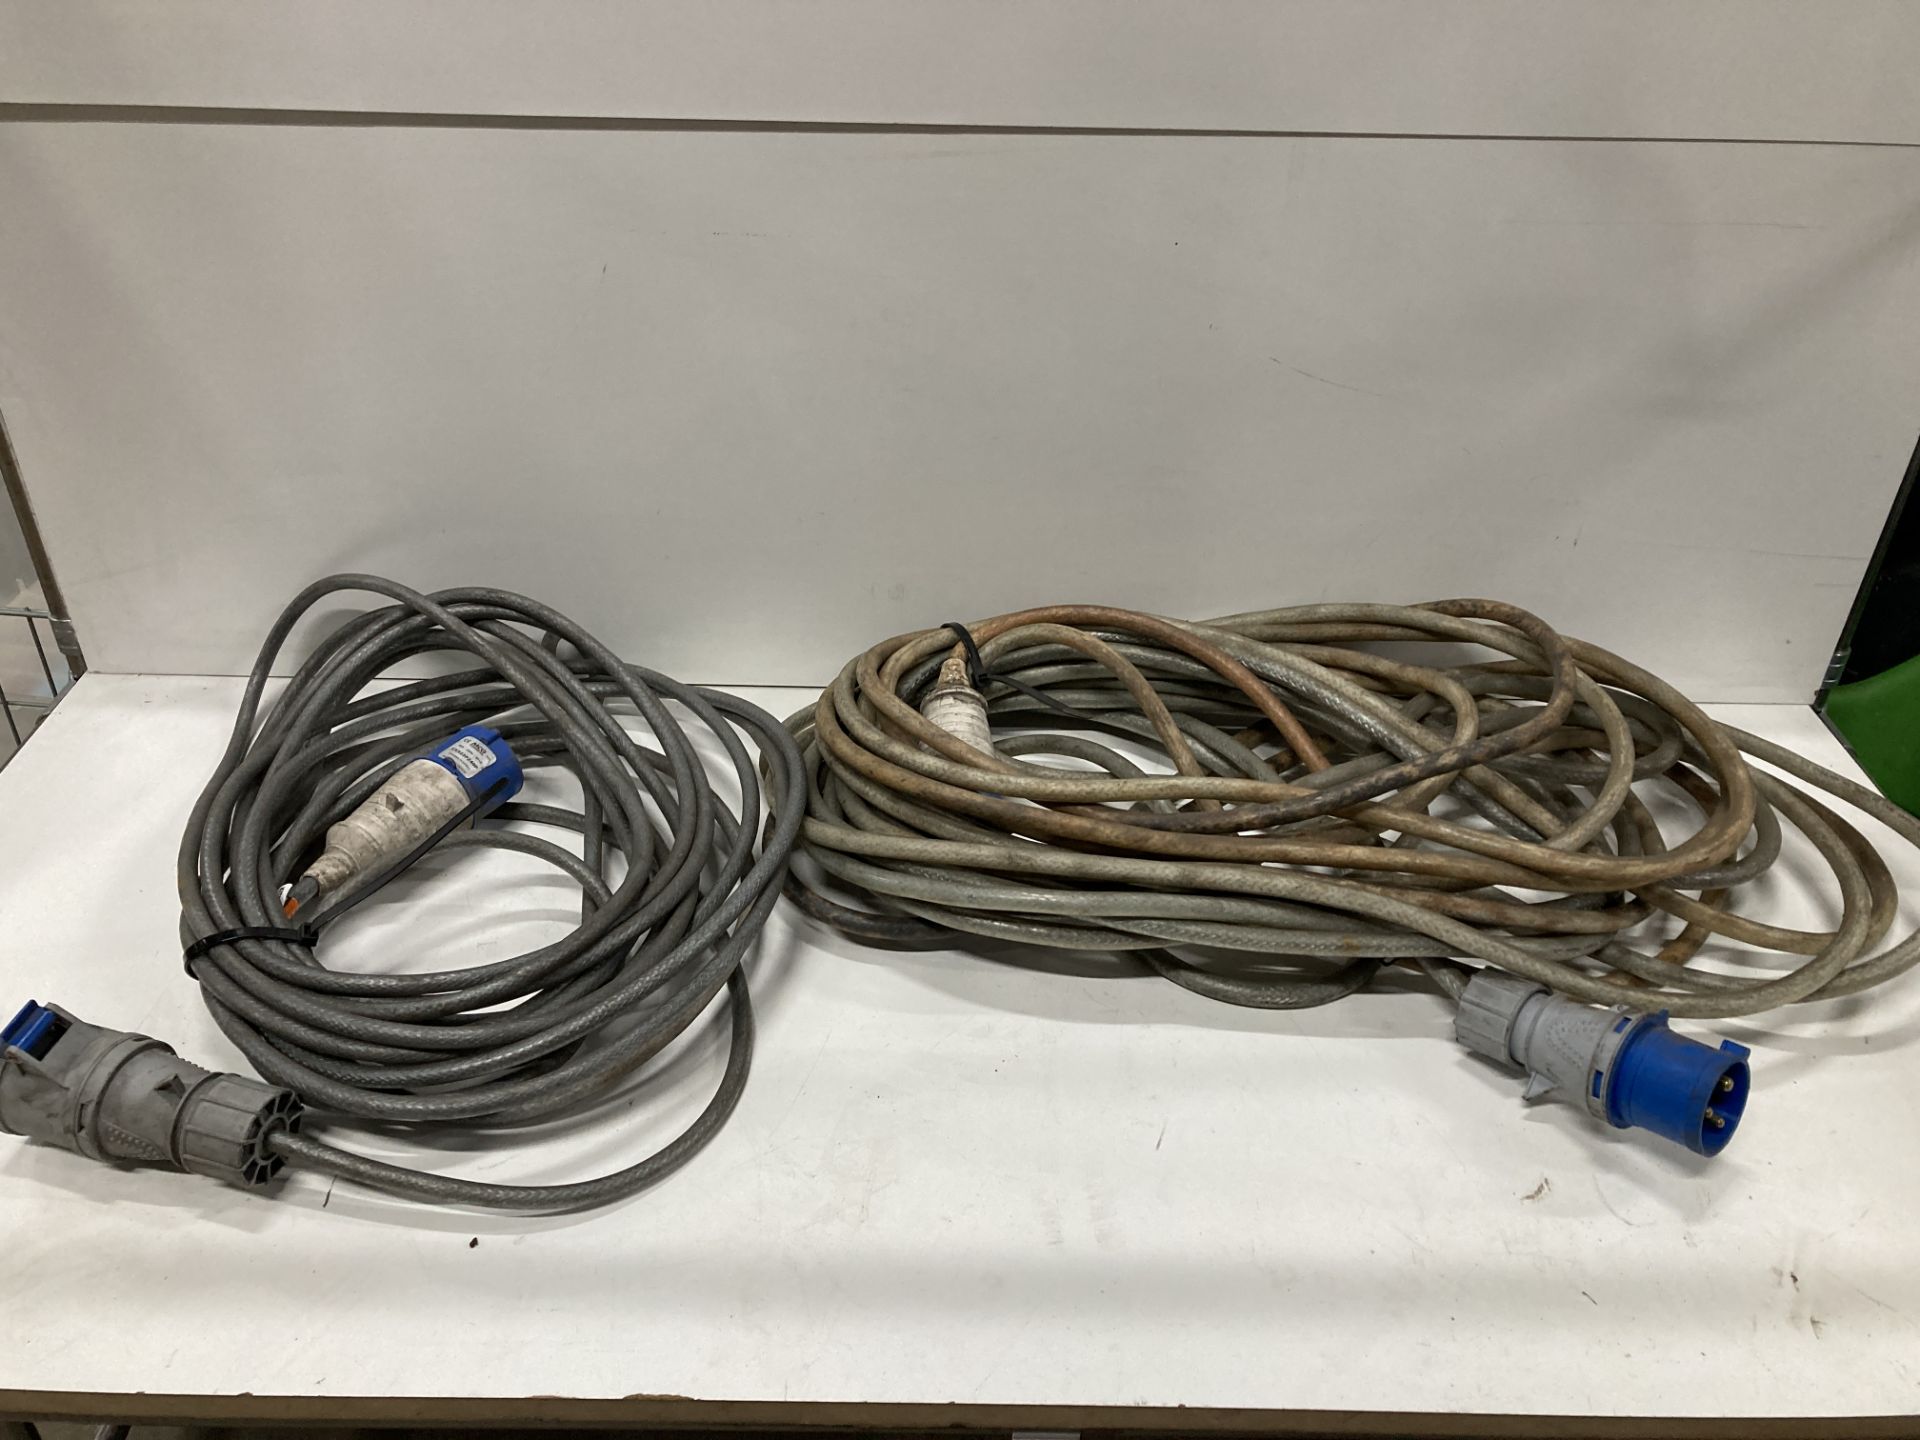 4 x Various 240v Extension/Adaptor Cables - As Pictured